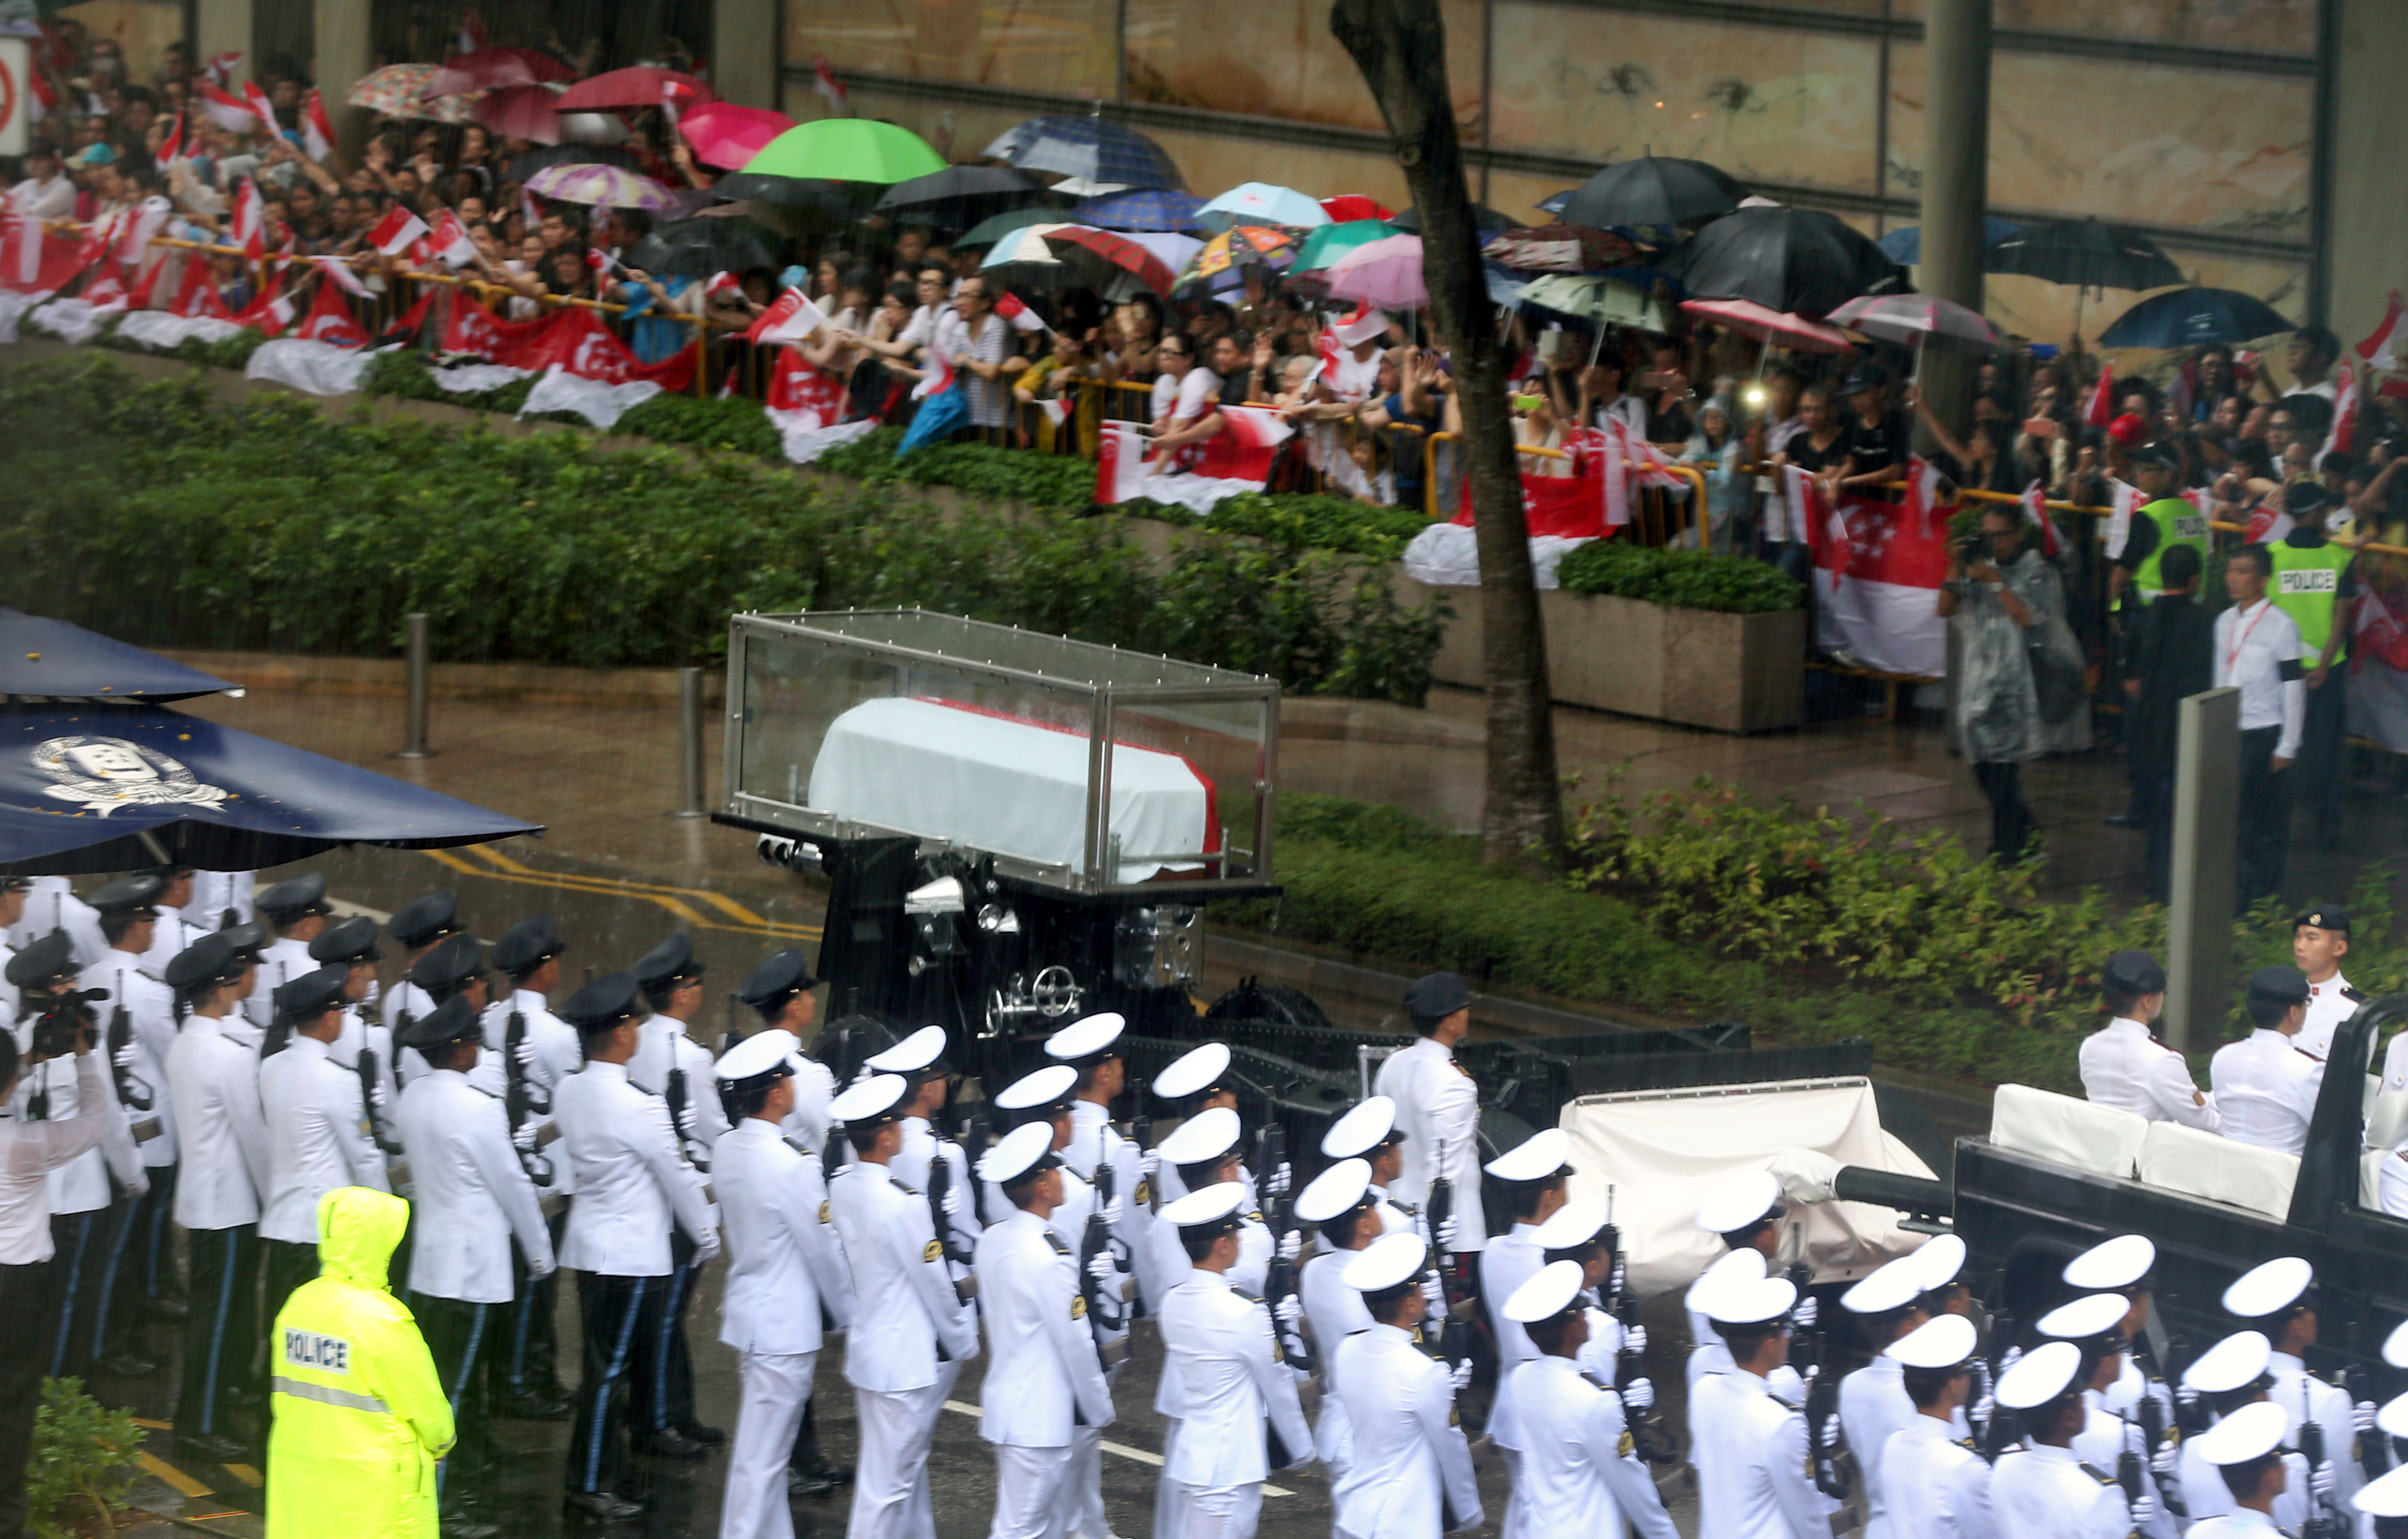 State Funeral Procession of Mr Lee Kuan Yew - Mar 2015 (MCI Photo by Terence Tan)